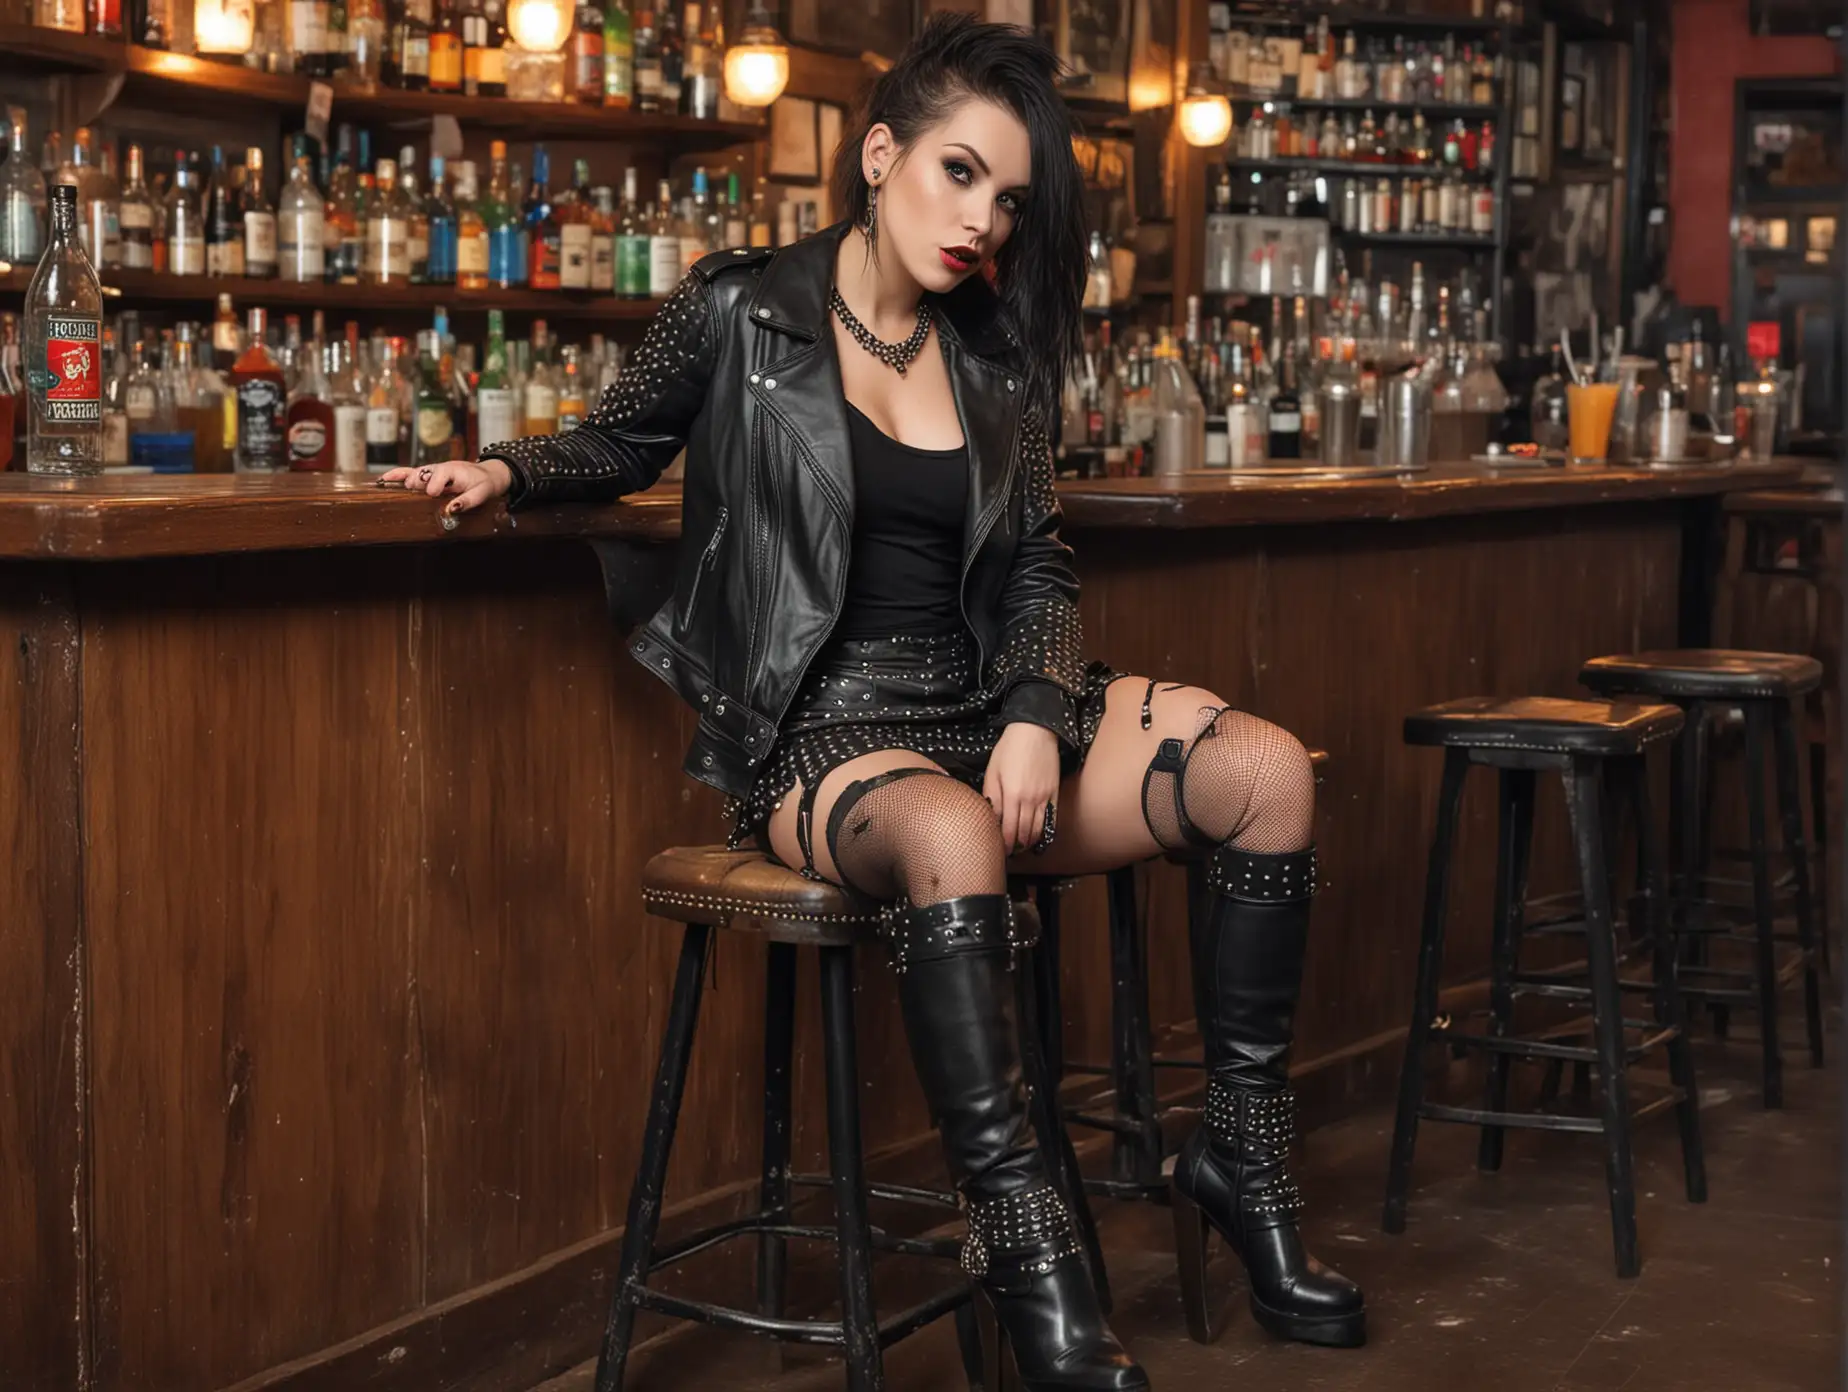 PUNK GIRL WEARING LEATHER STUDDED JACKET SITTING IN BAR WEARING LEATHER MINI SKIRT FISHNET STOCKINGS KNEE LENGTH BOOTS